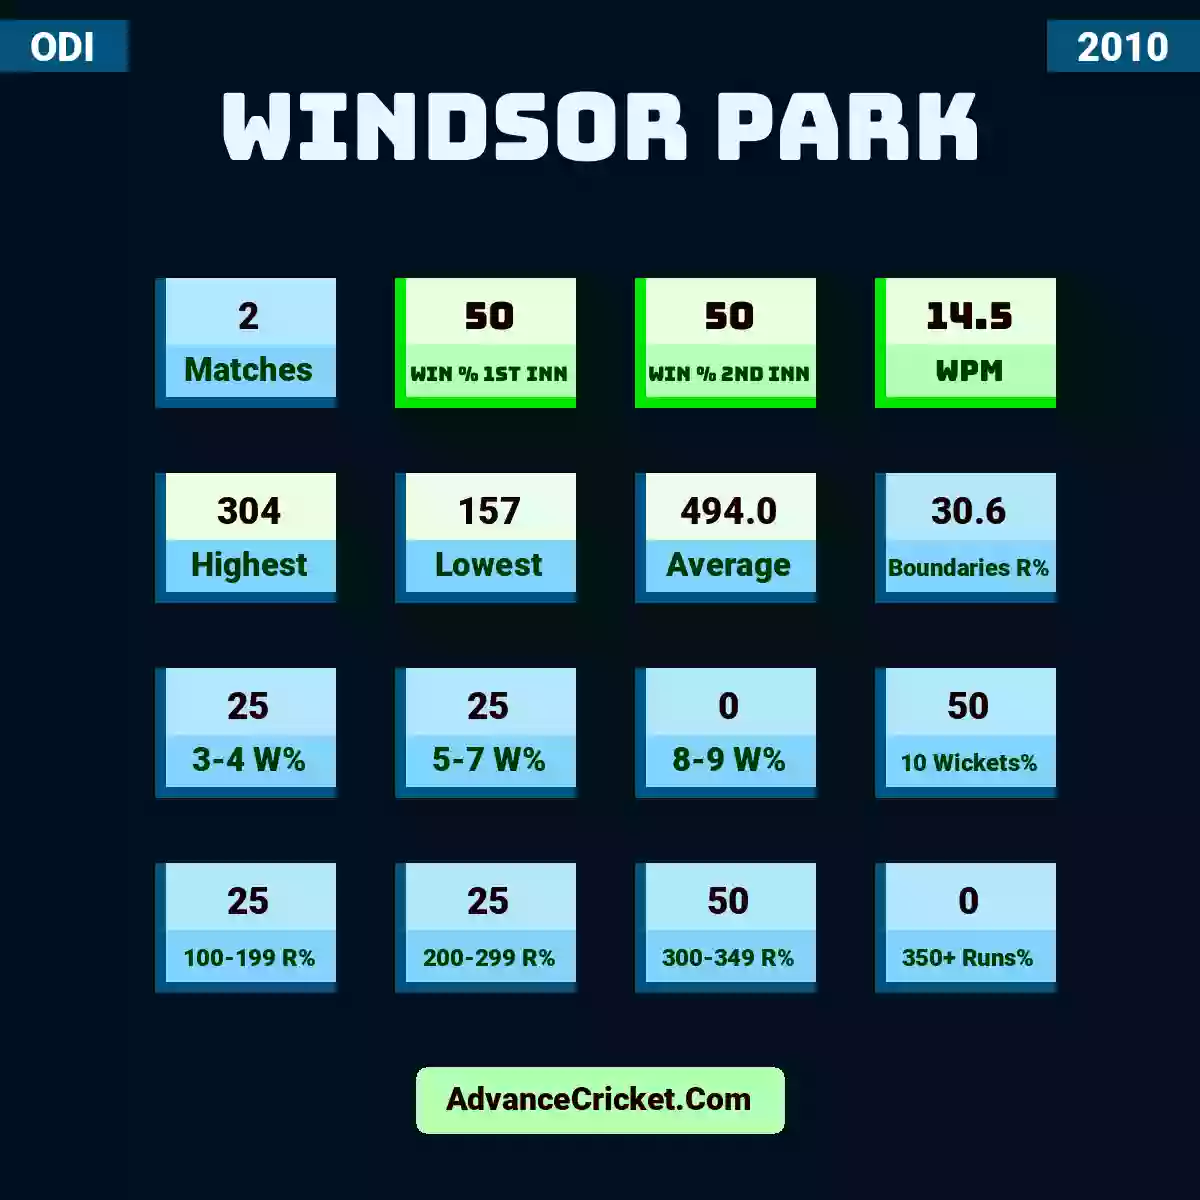 Image showing Windsor Park with Matches: 2, Win % 1st Inn: 50, Win % 2nd Inn: 50, WPM: 14.5, Highest: 304, Lowest: 157, Average: 494.0, Boundaries R%: 30.6, 3-4 W%: 25, 5-7 W%: 25, 8-9 W%: 0, 10 Wickets%: 50, 100-199 R%: 25, 200-299 R%: 25, 300-349 R%: 50, 350+ Runs%: 0.